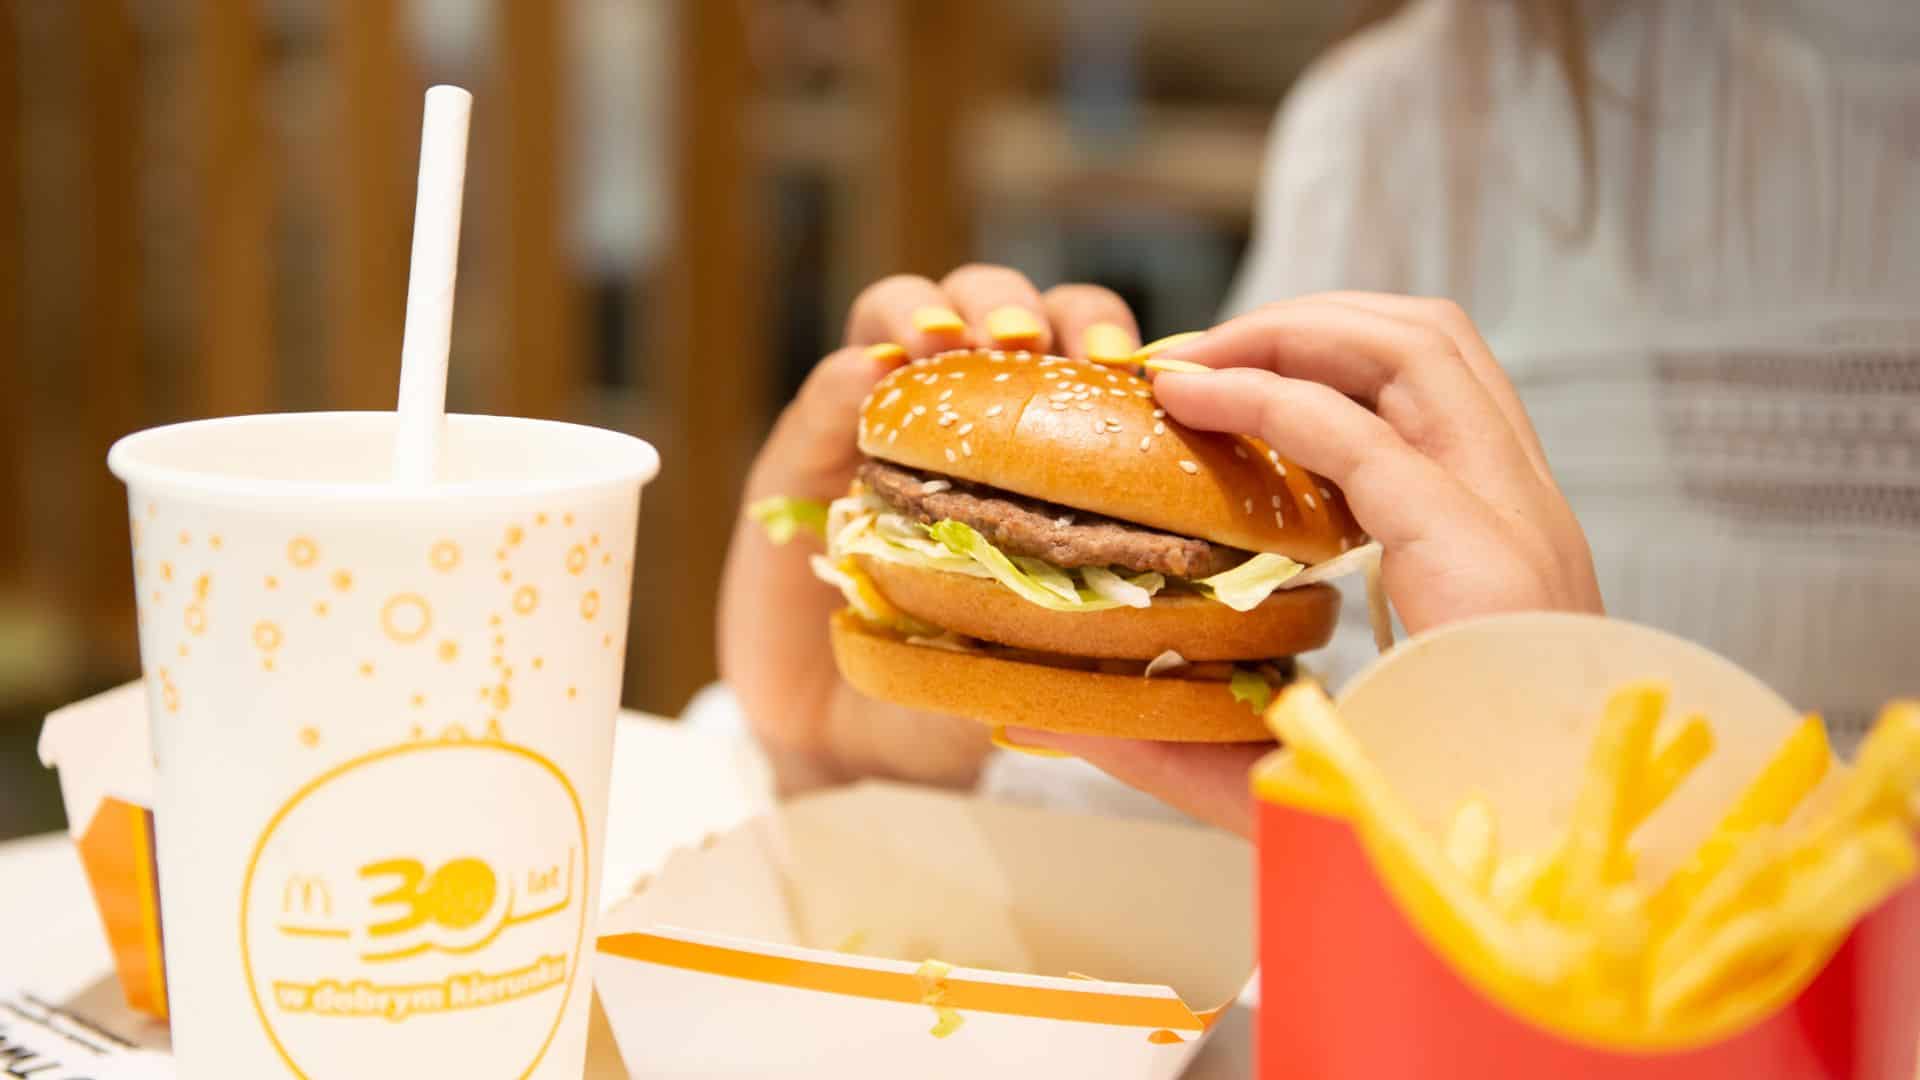 <p>Is it just us, or does McDonald’s bun have a specific oomph to it that no other burger-selling chain has mastered?</p><p>Turns out, it isn’t accidental. McDonald's uses high-quality ingredients in its dough, which spends a good time proofing and setting, so it’s already guaranteed to deliver flavor.</p><p>McDonald’s also has specific criteria to match quality; each bun is baked to match this and turns out into the good dough ball we love.</p>